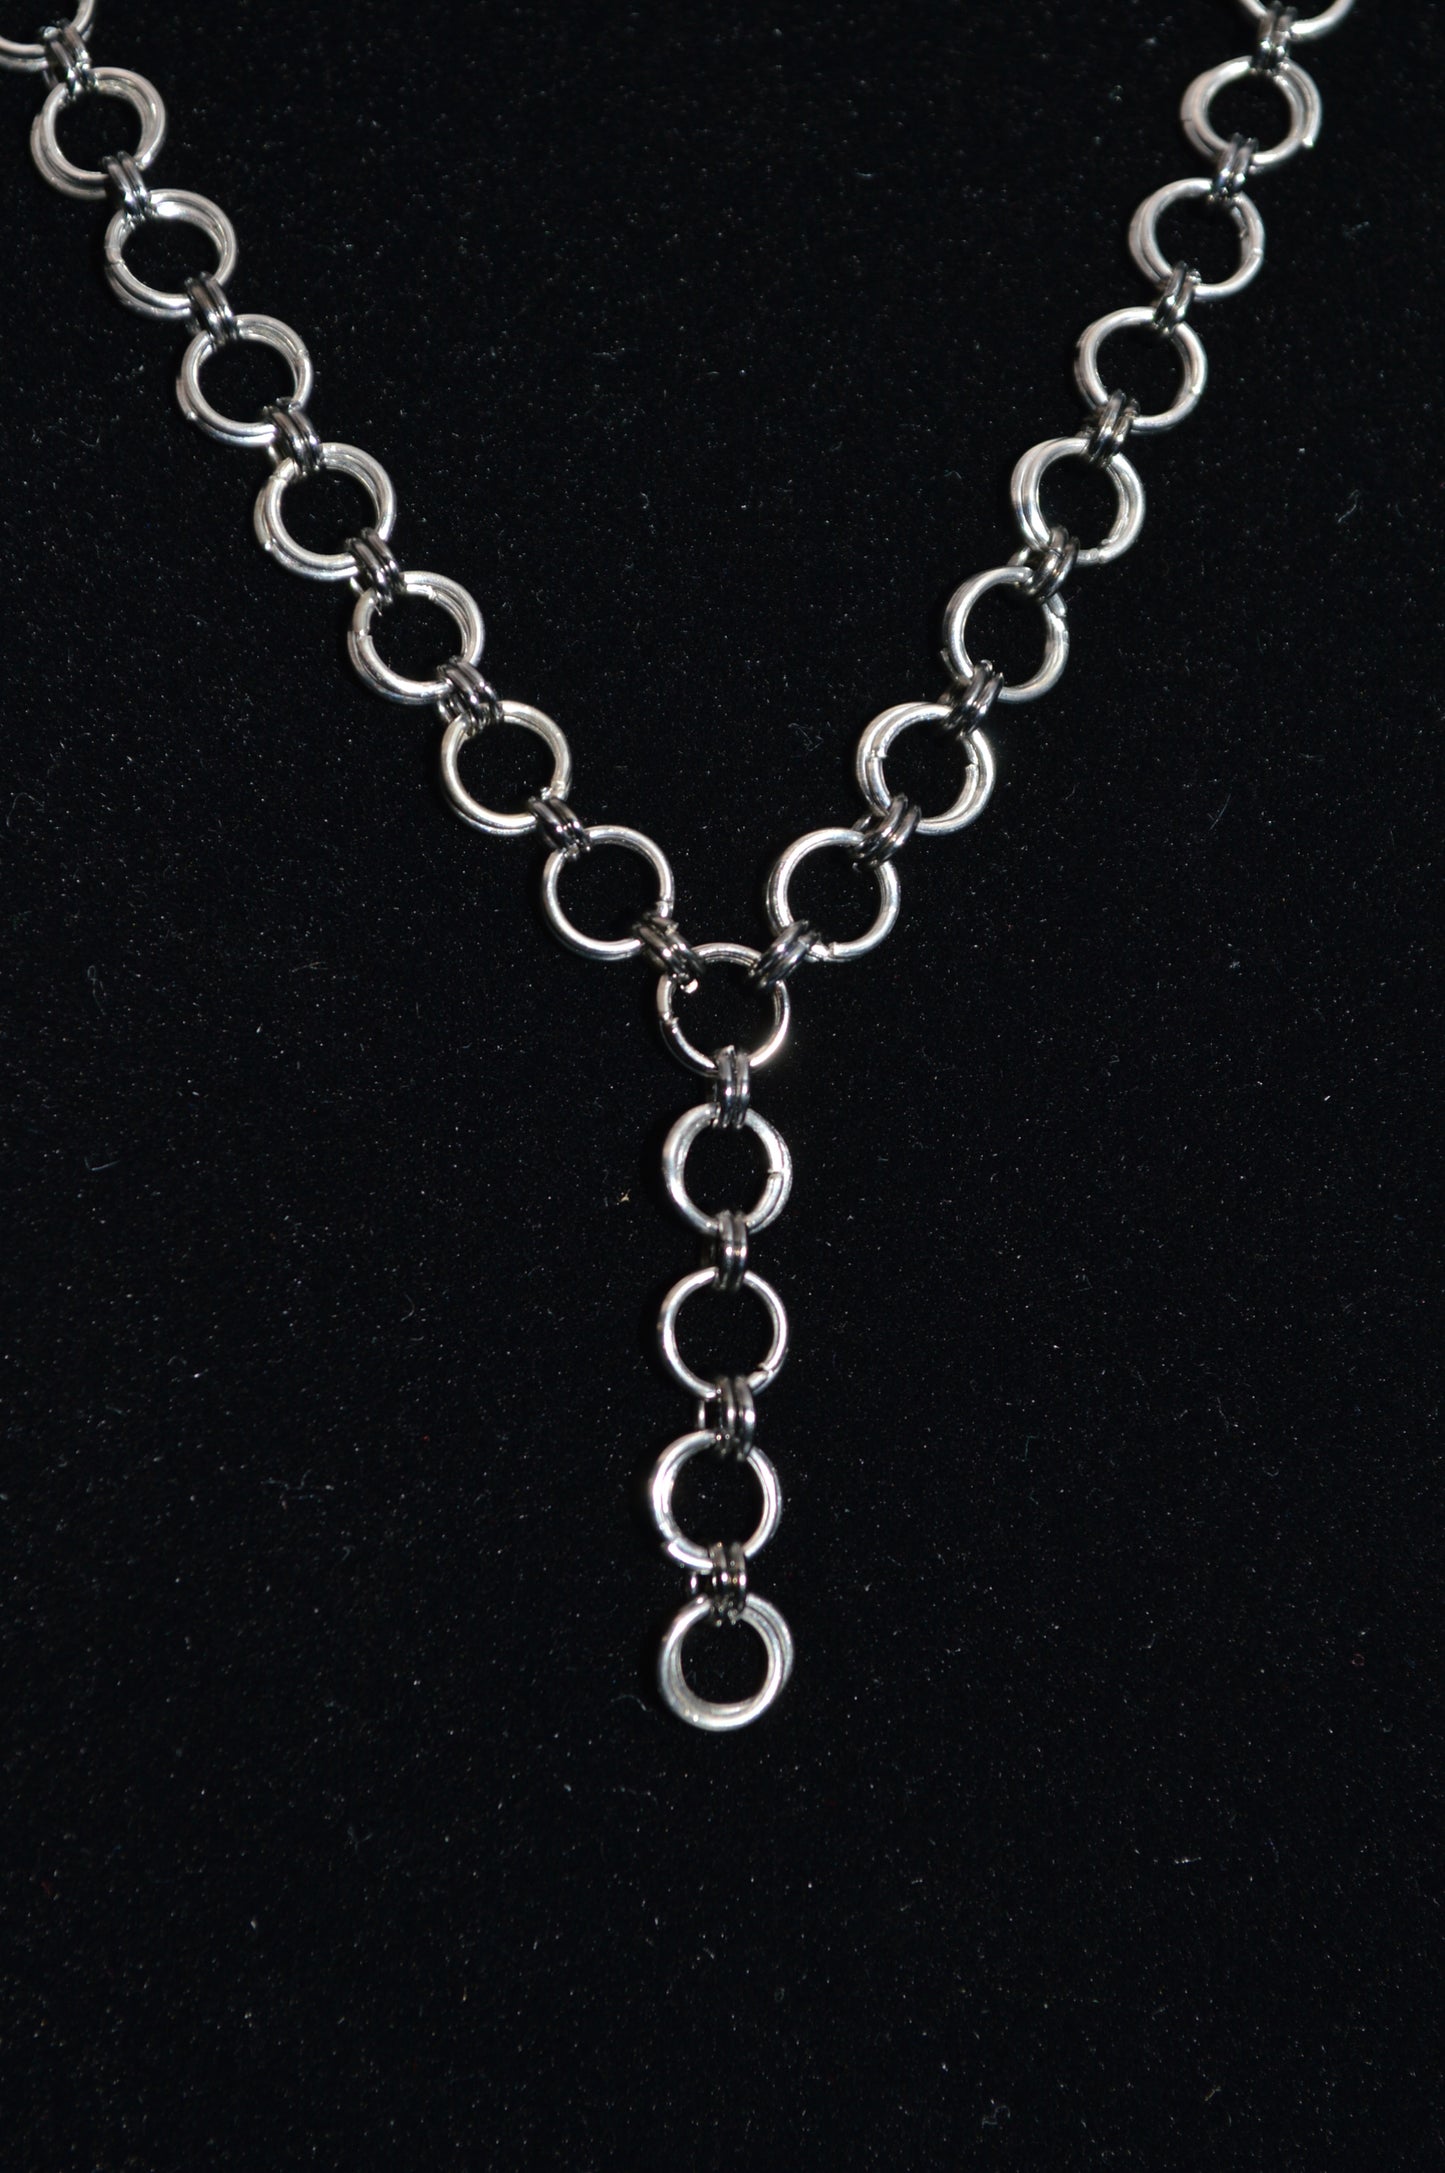 Silver and Gunmetal Black Hand Linked Chainmail Necklace and Earring Set